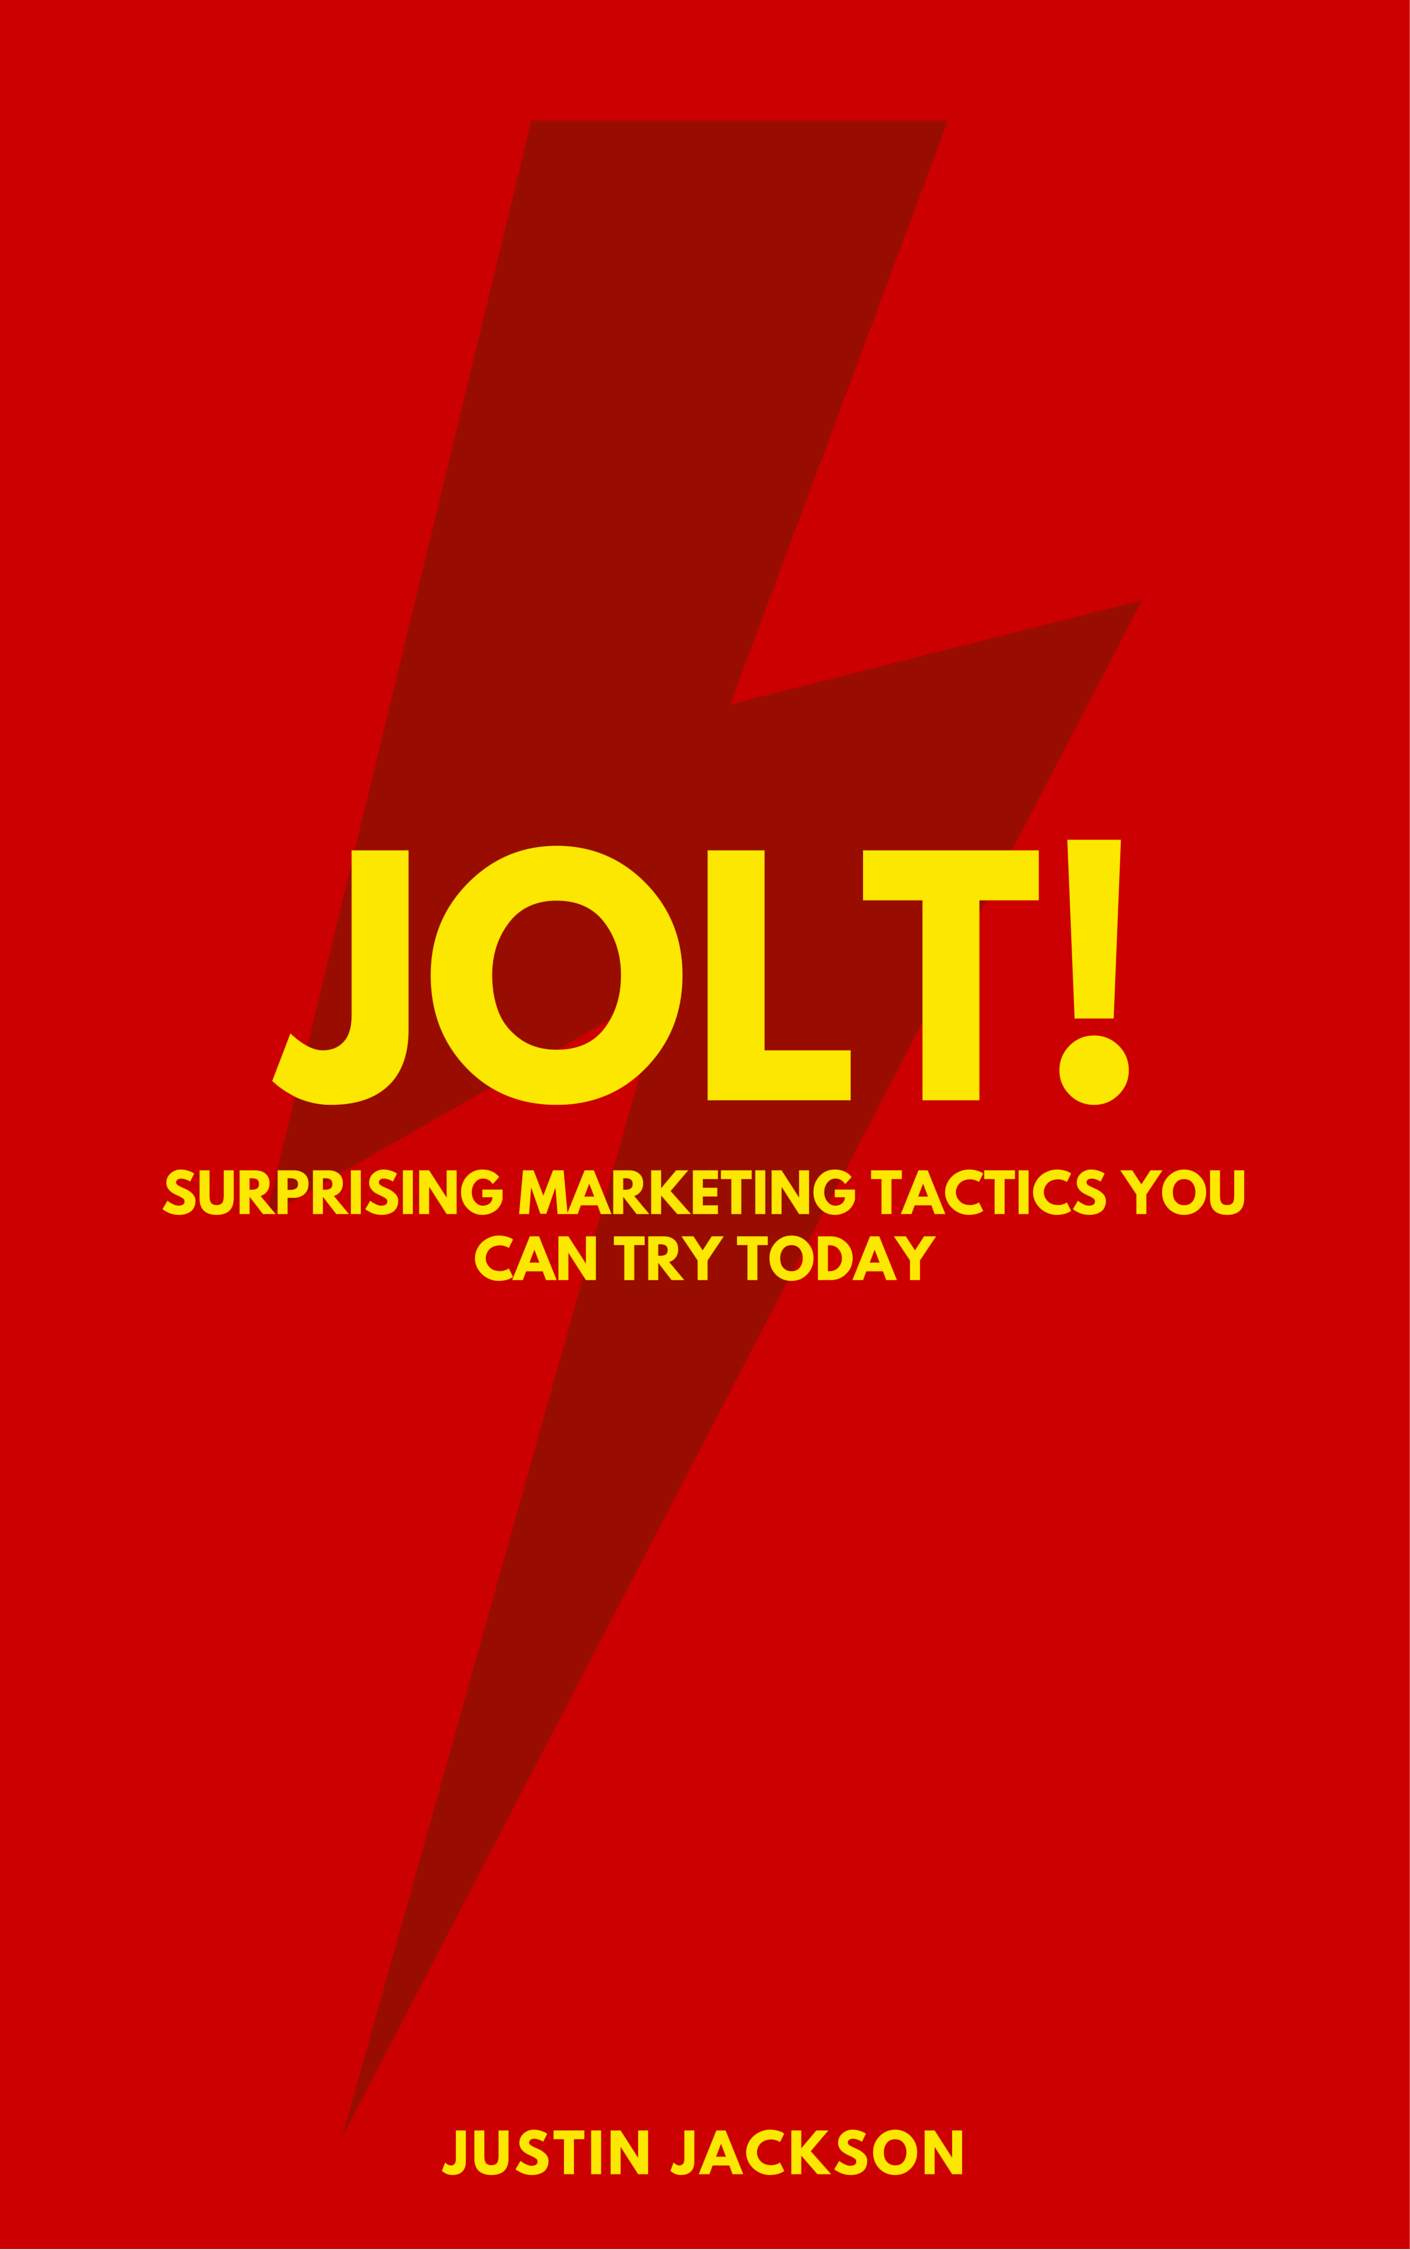 Jolt! Creative marketing tactics you can try today